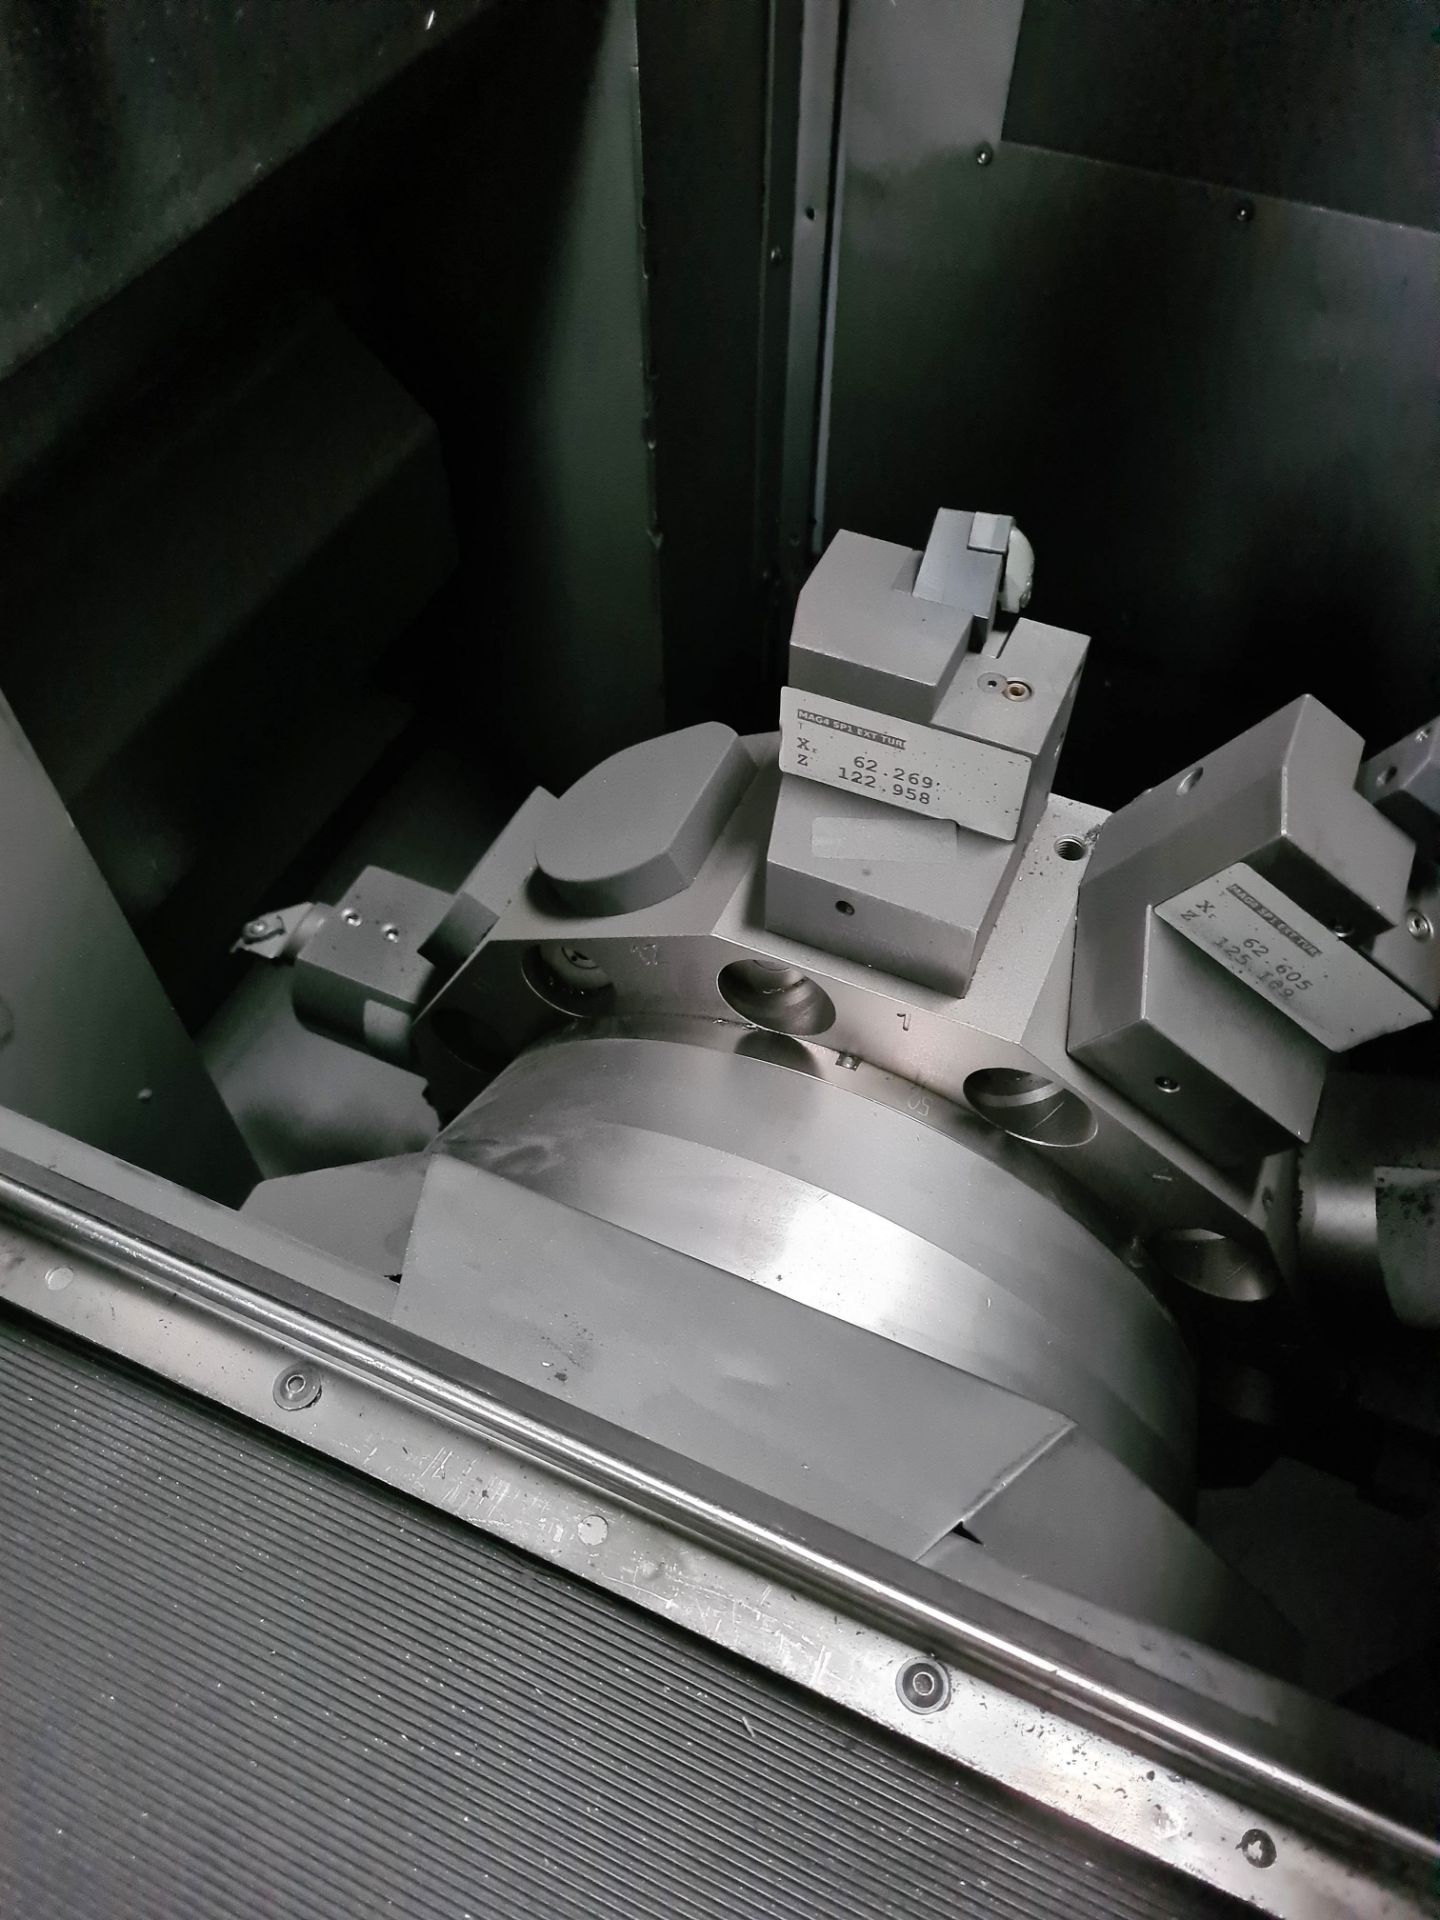 EMAG VSC 400 DUO MACHINING CELL - Image 9 of 13